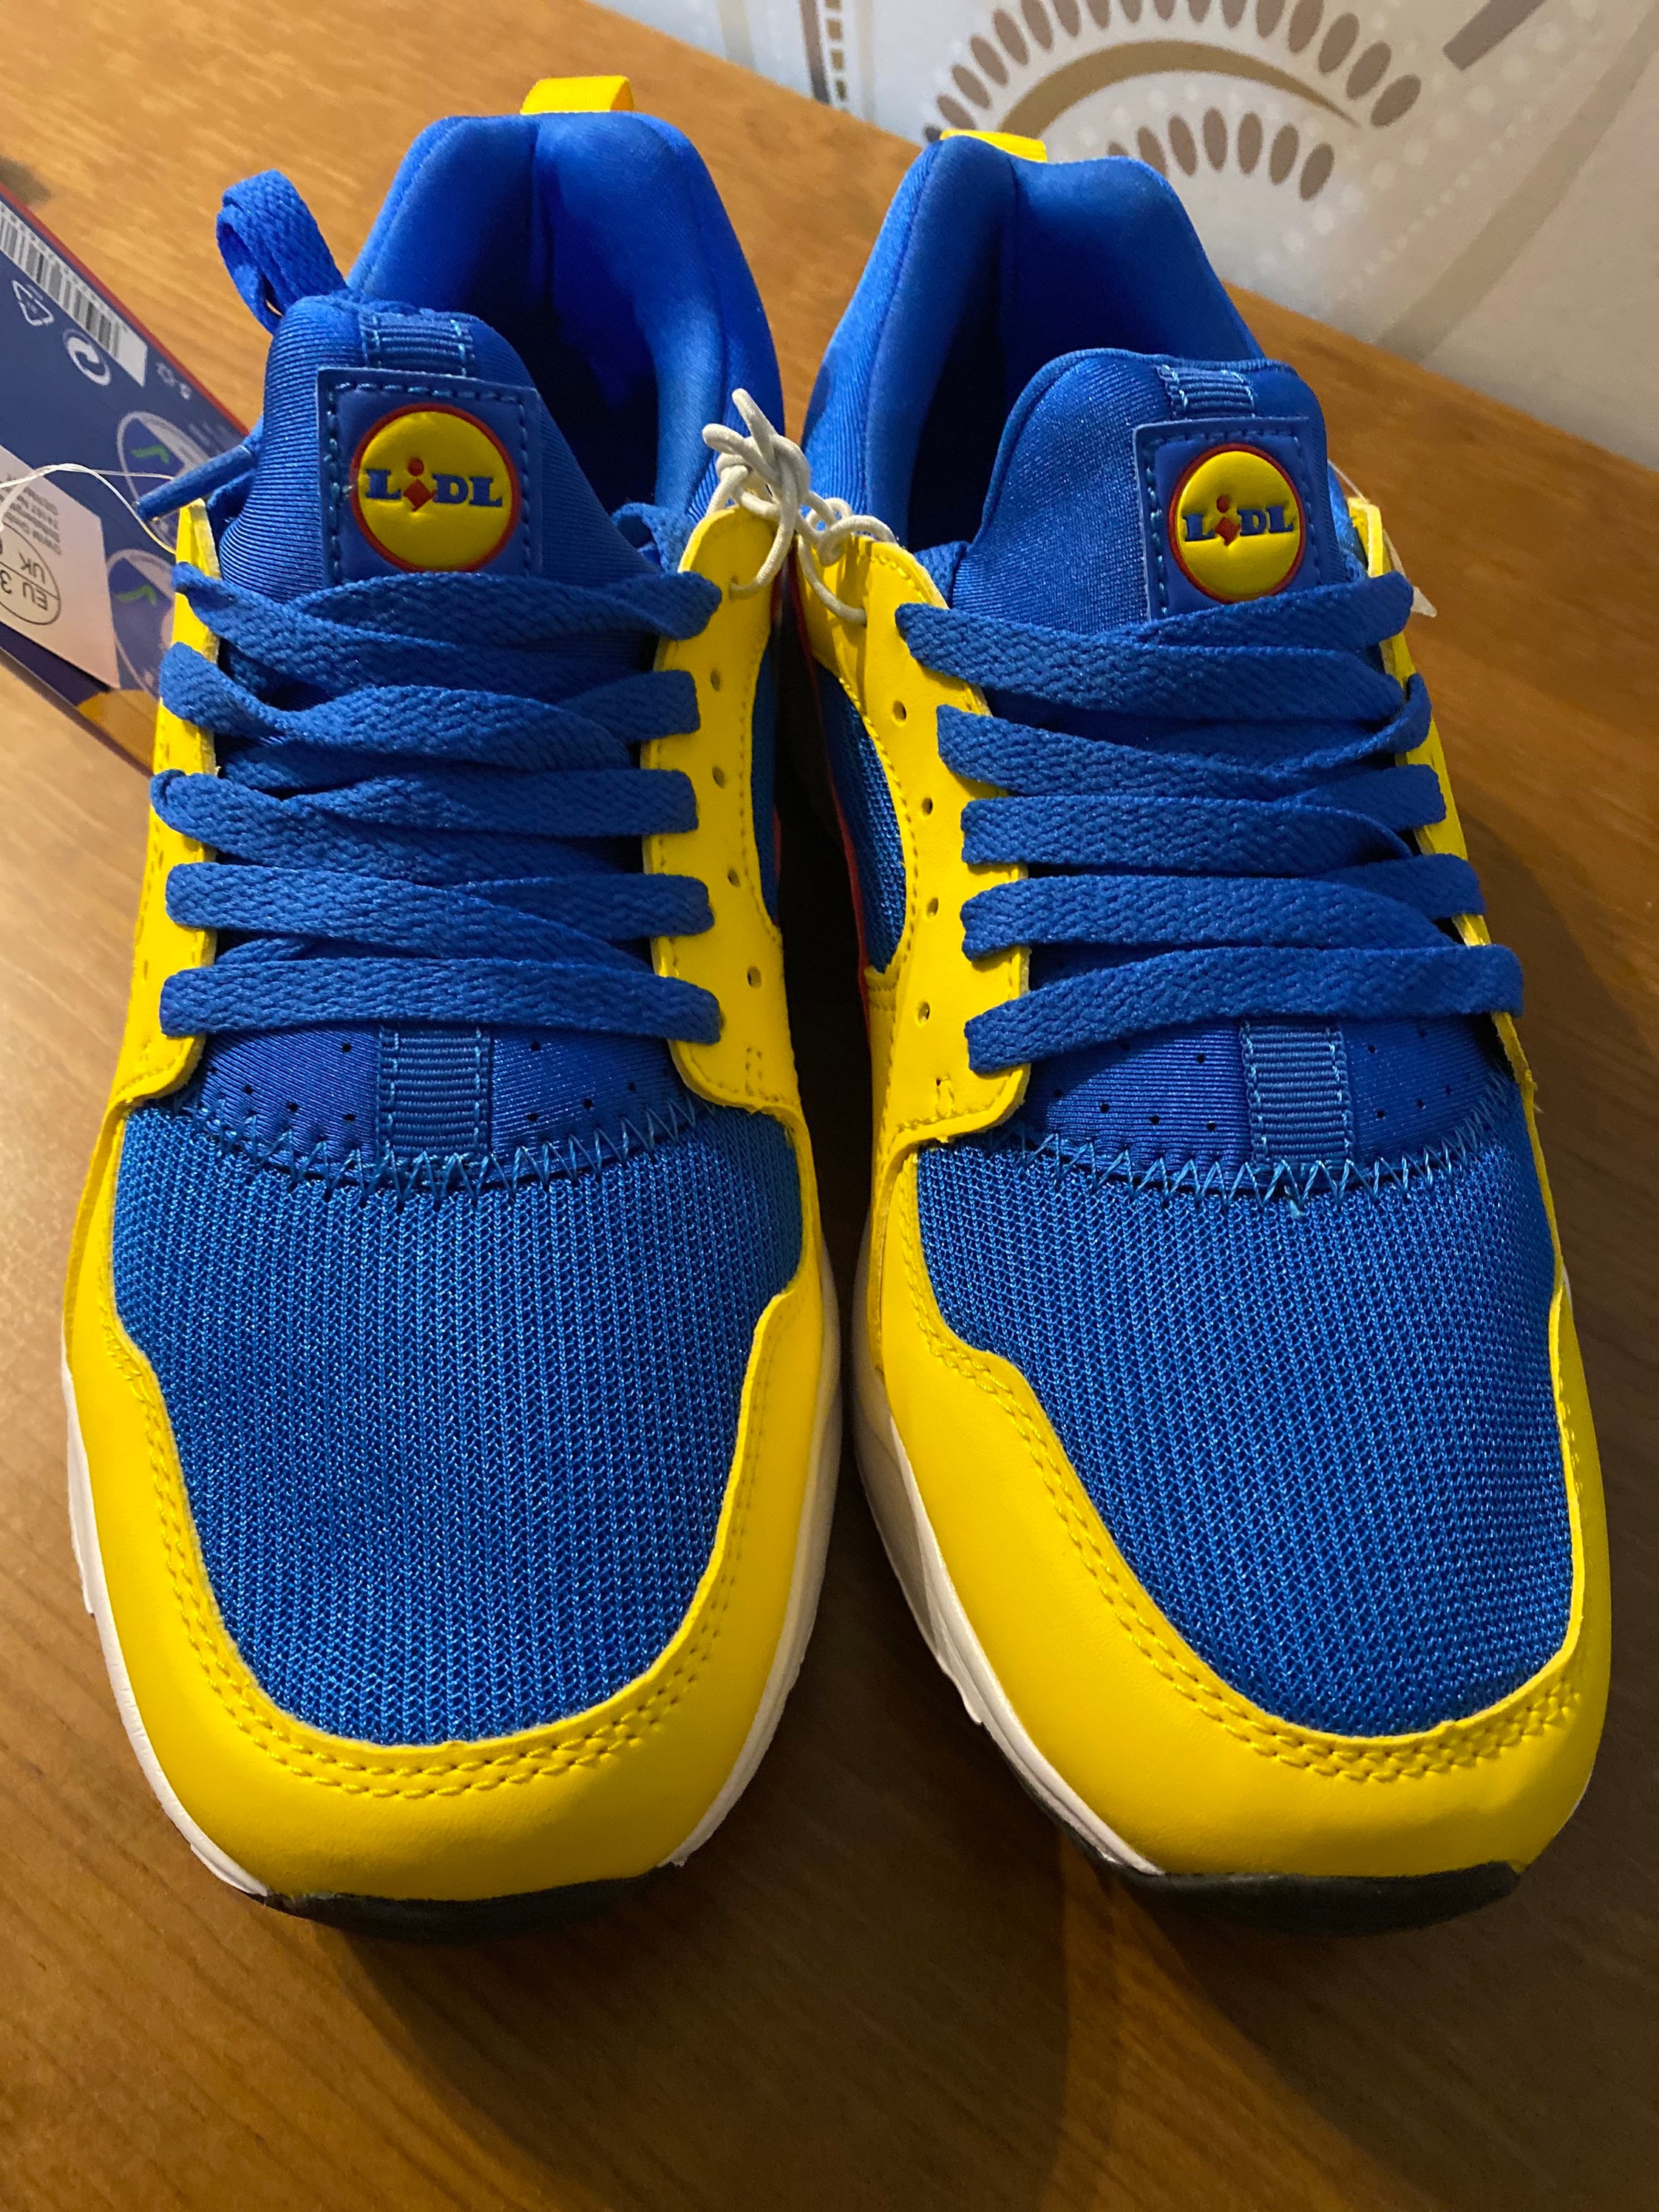 Buy Lidl Sneakers Limited Edition Shoes 38 Size uk 5 Online in India 